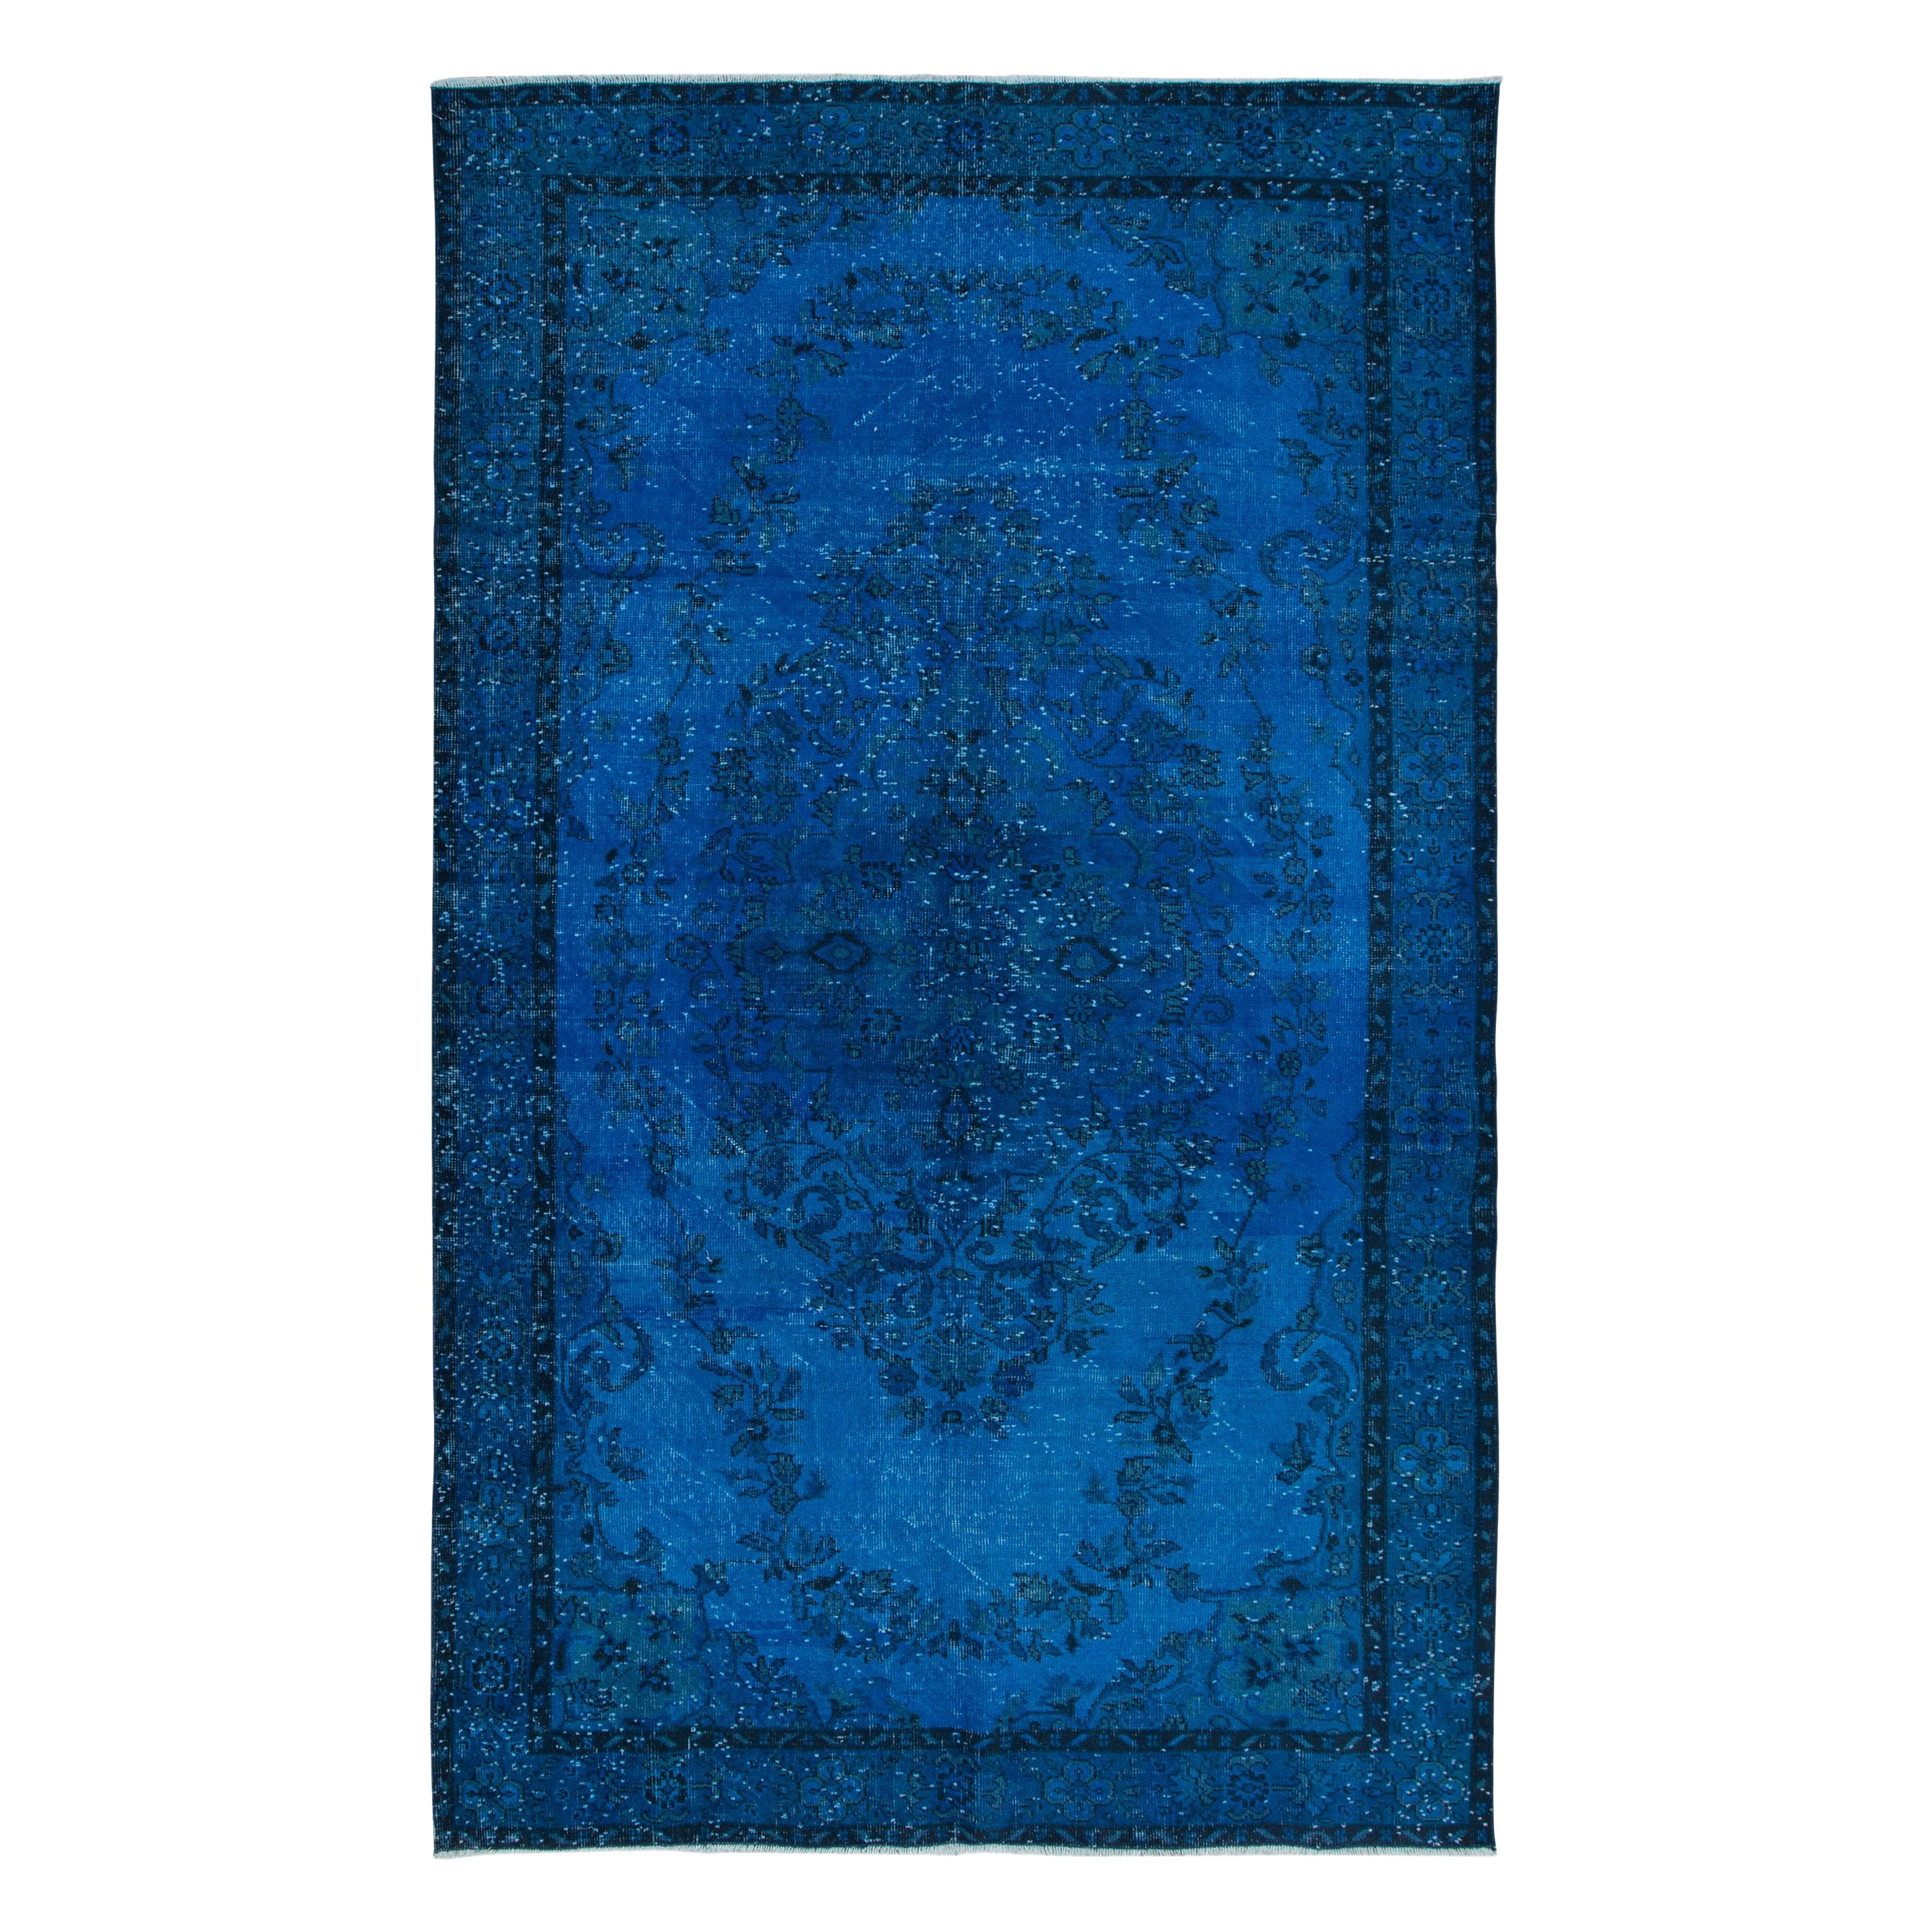 6.2x10.2 Ft Contemporary Blue Area Rug, Handwoven and Handknotted in Turkey For Sale